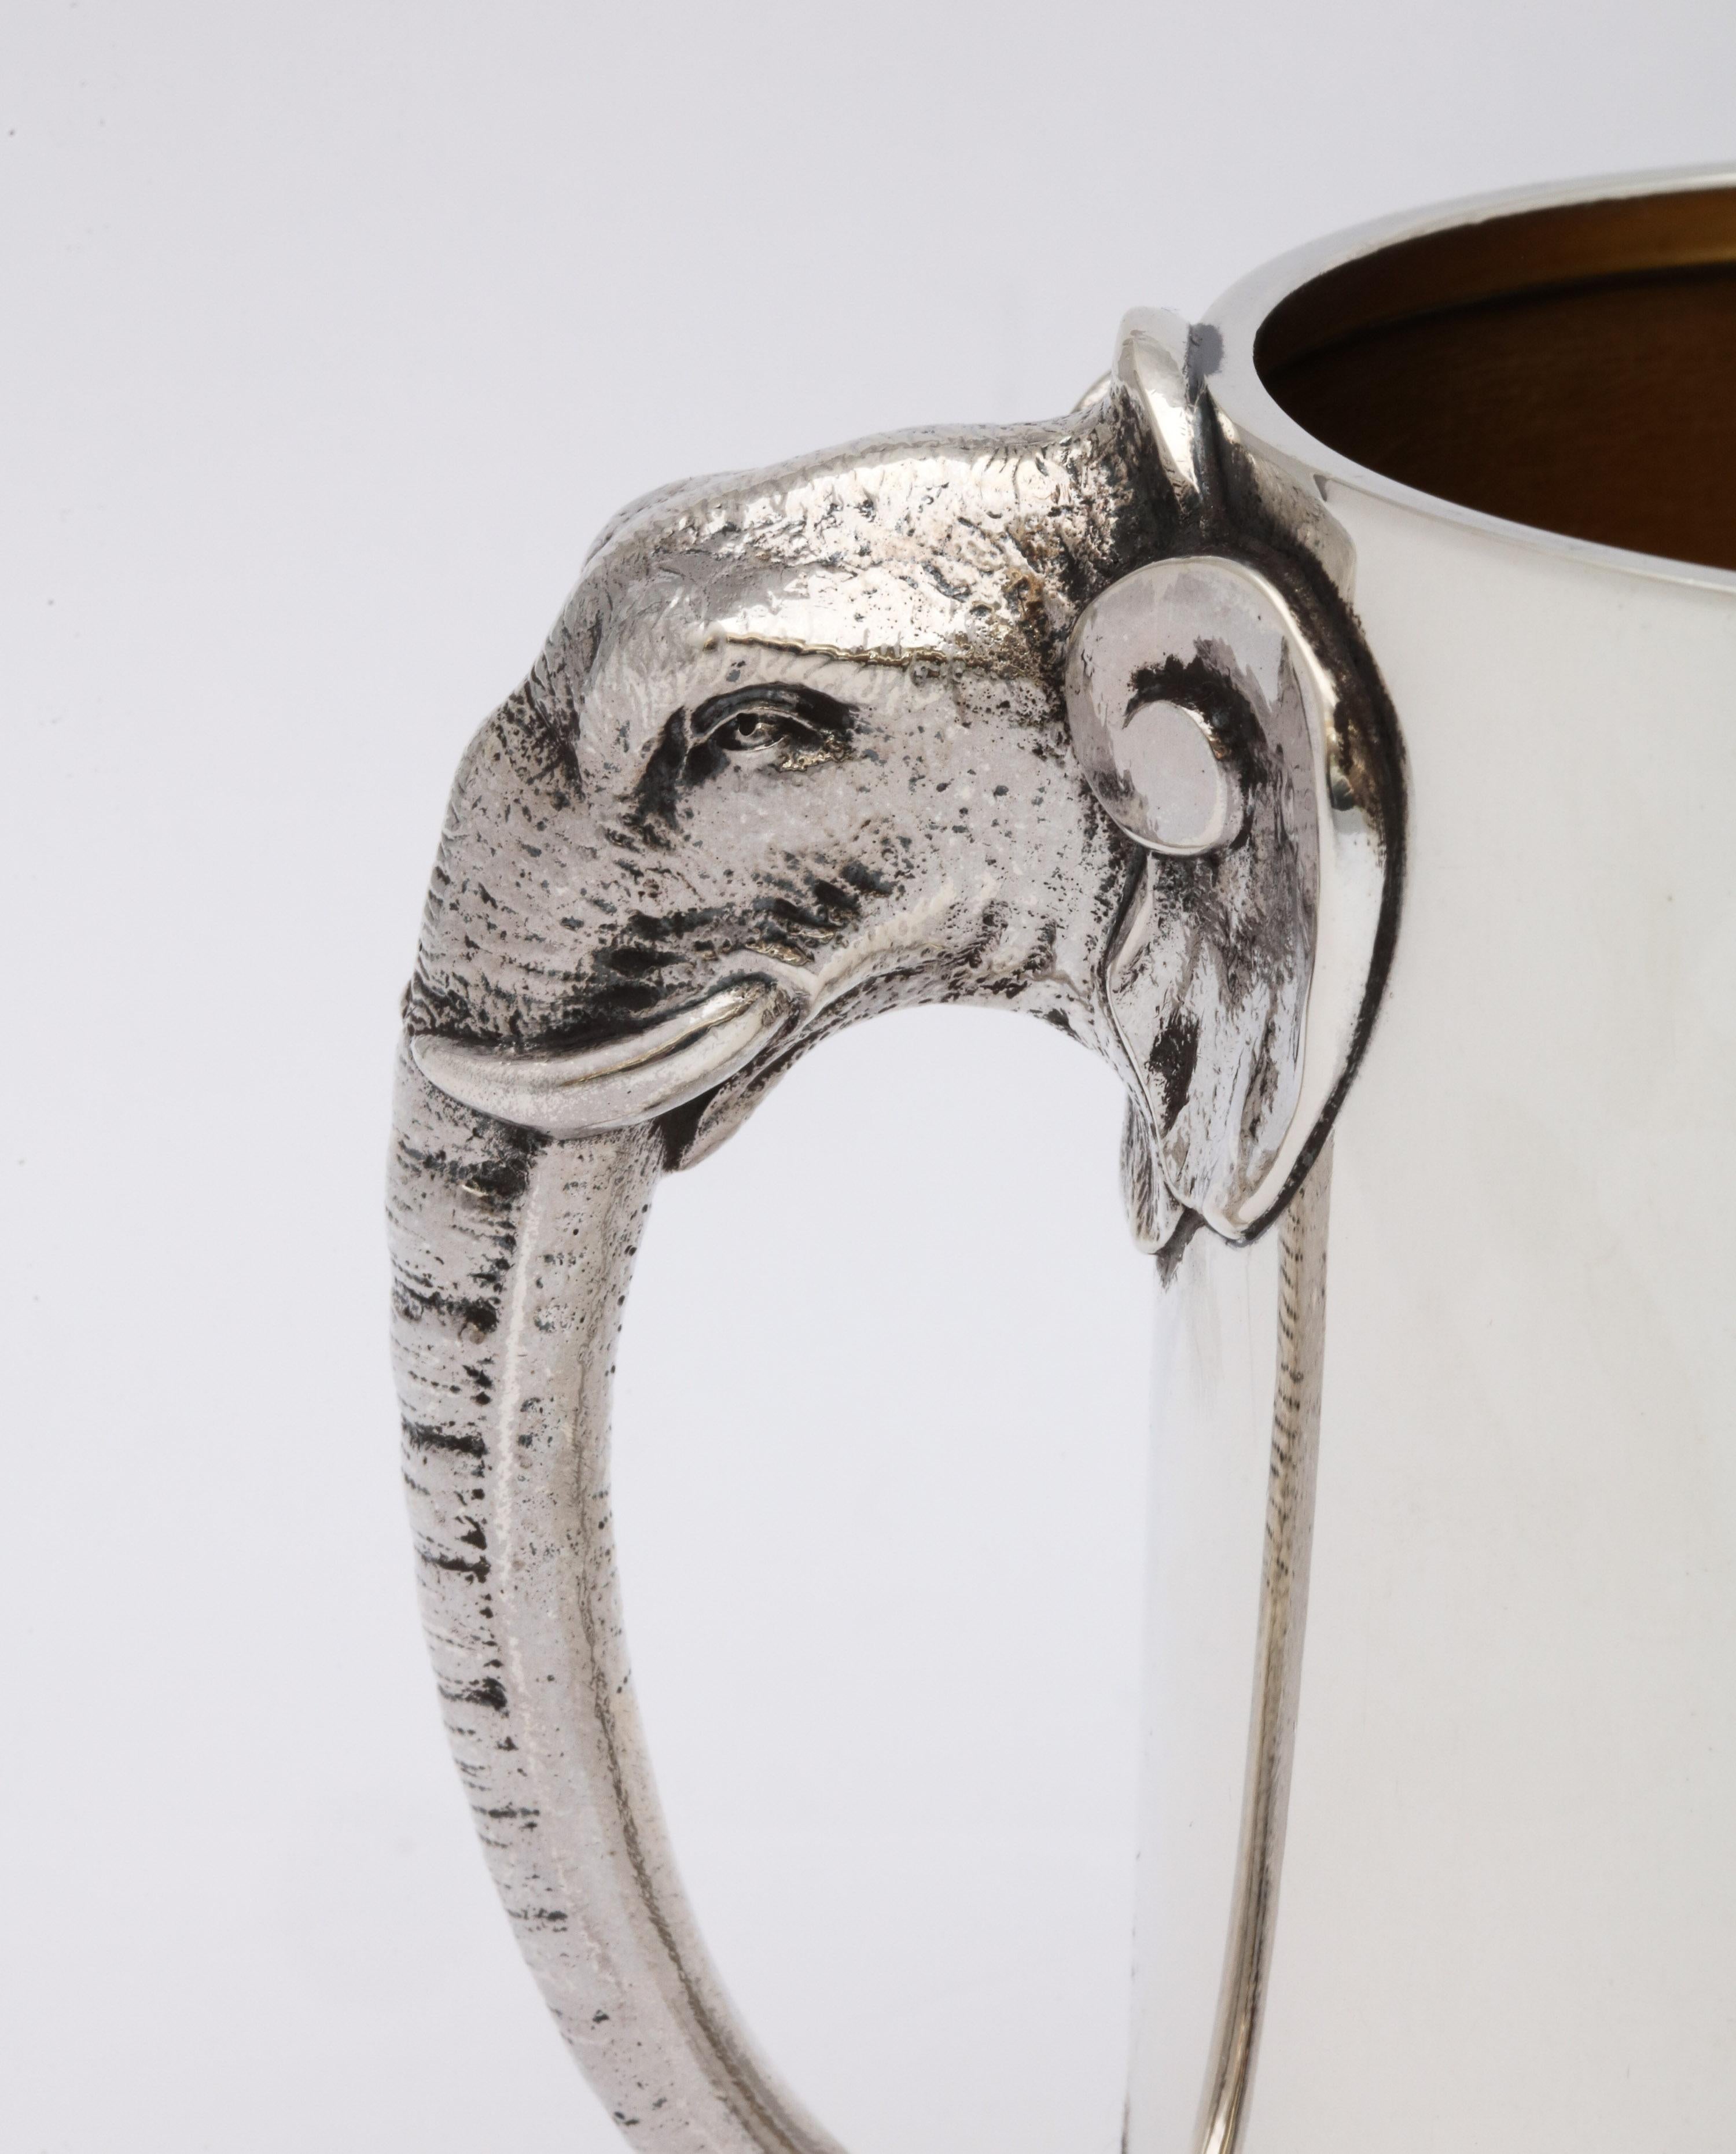 Late 19th Century Rare Victorian Sterling Silver Mug/Cup with Elephant-Form Handle by Gorham